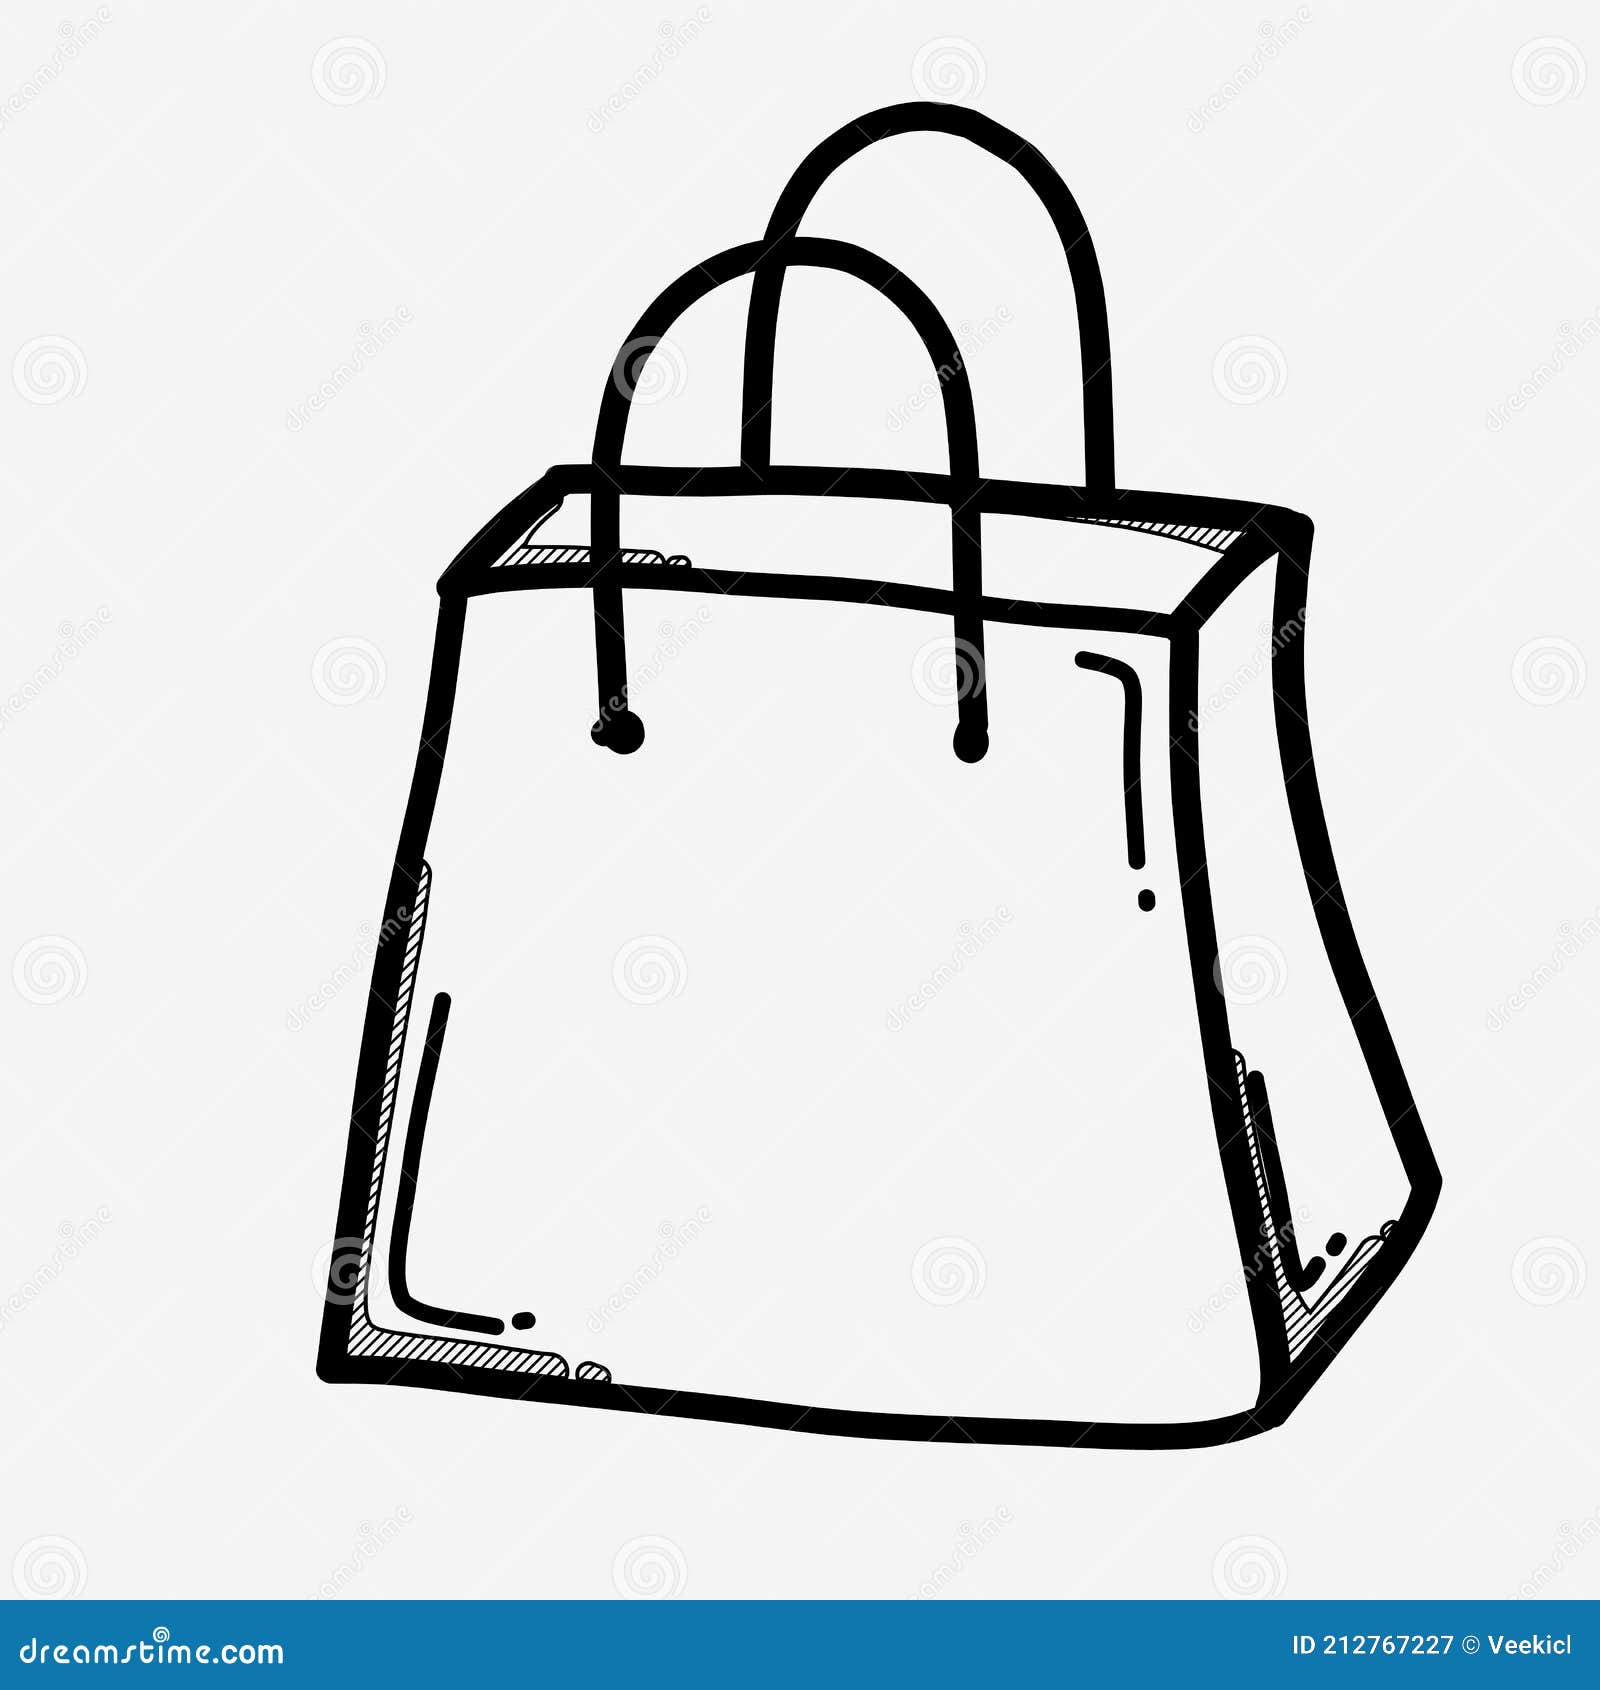 100,000 Shopping bag Vector Images